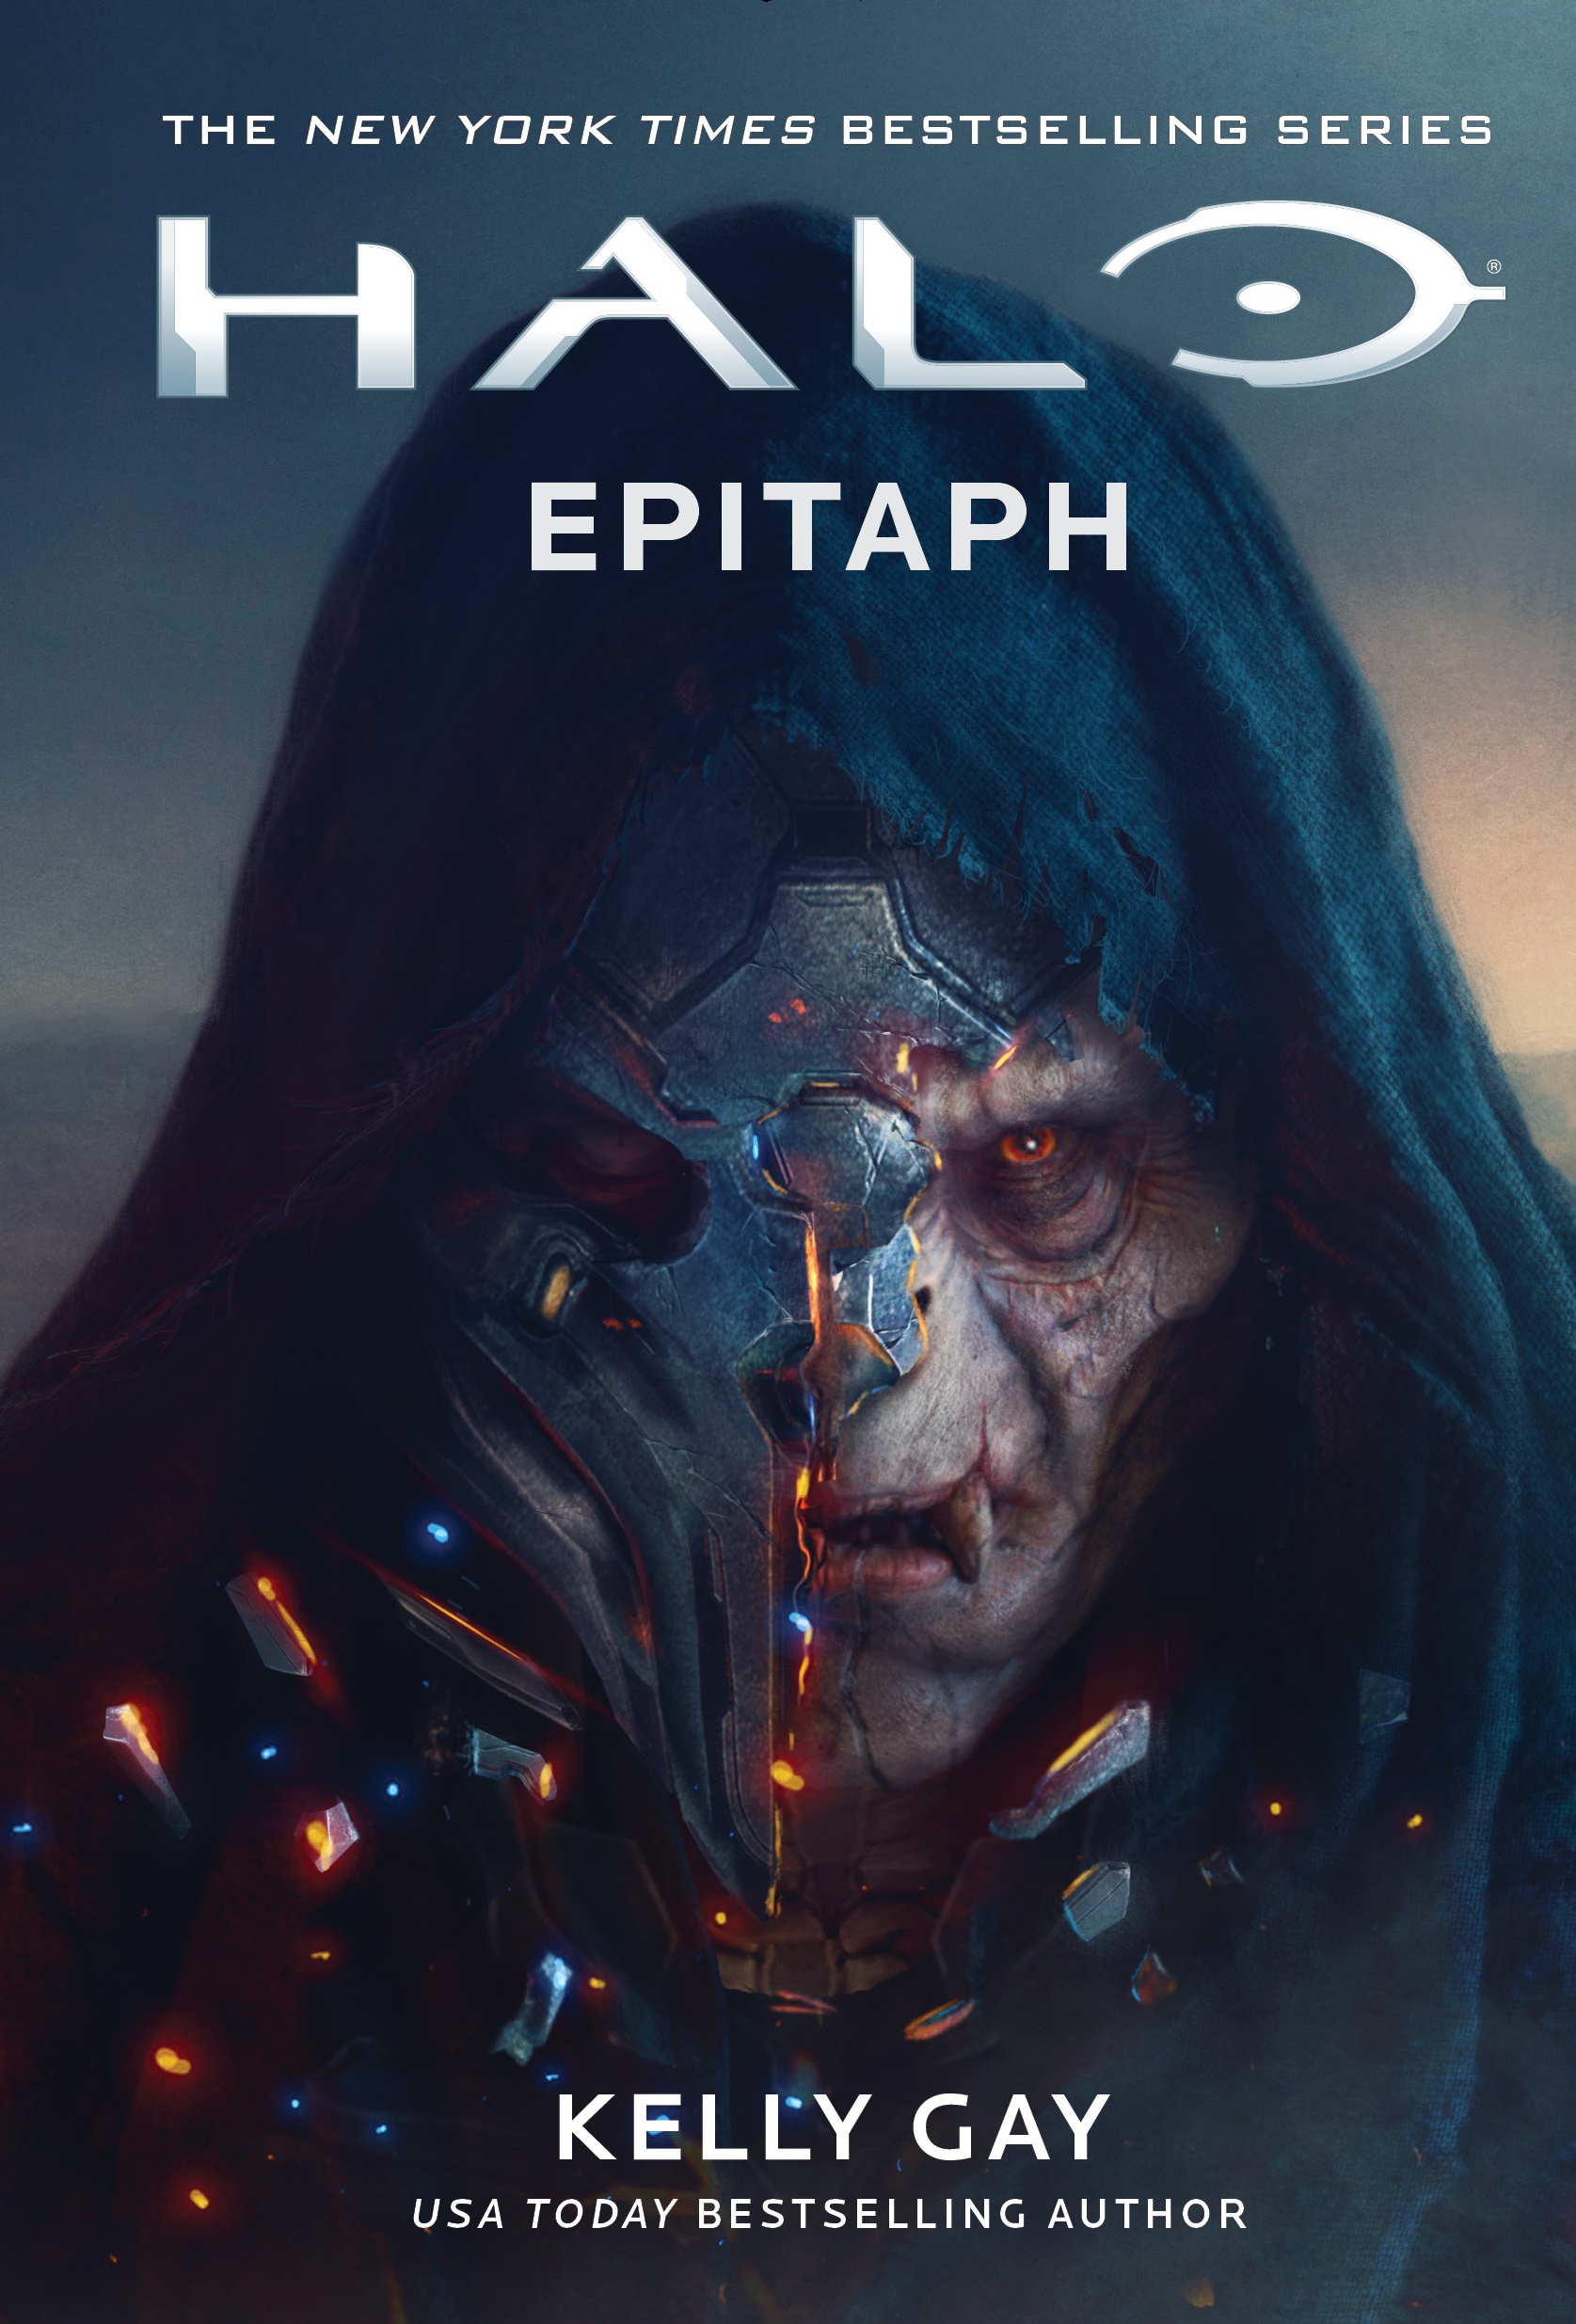 Front cover of Halo: Epitaph depicting the hooded figure of the Didact, his face half exposed by his broken helmet